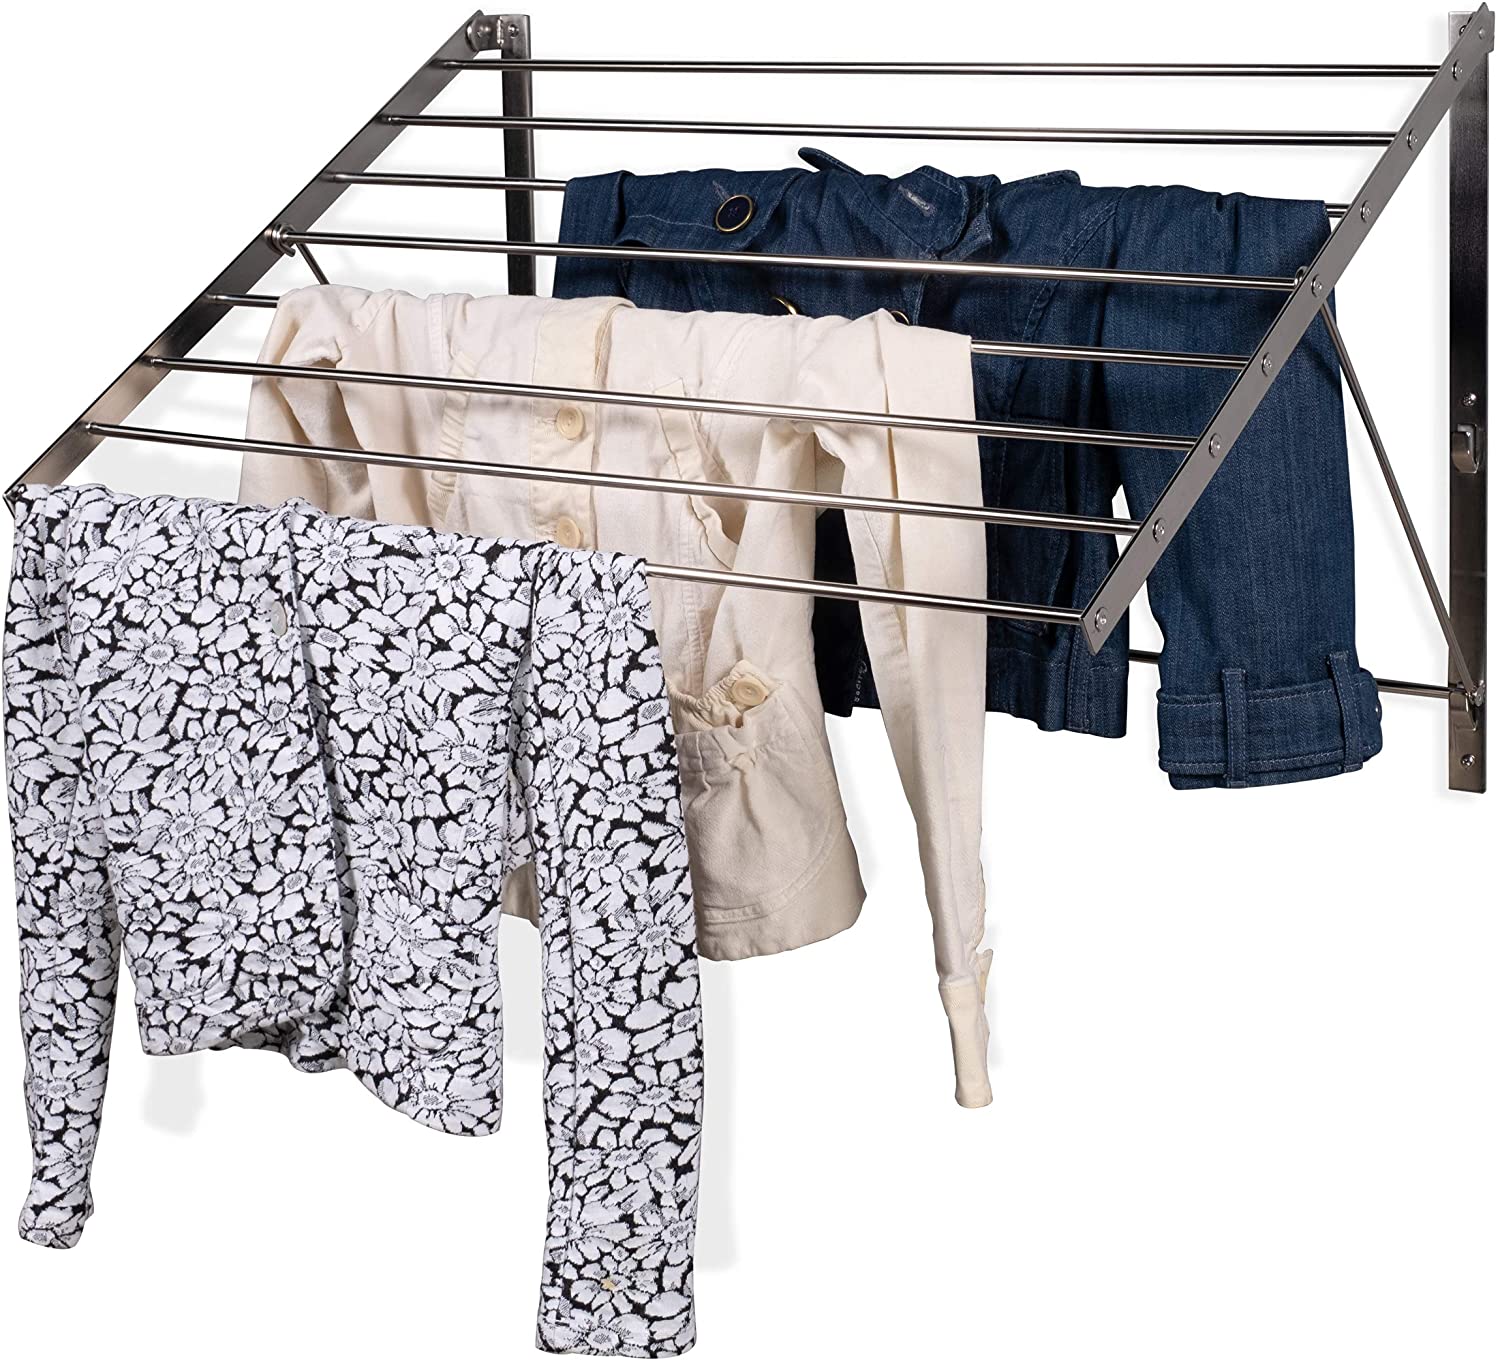 Compact and foldable hanging drying rack